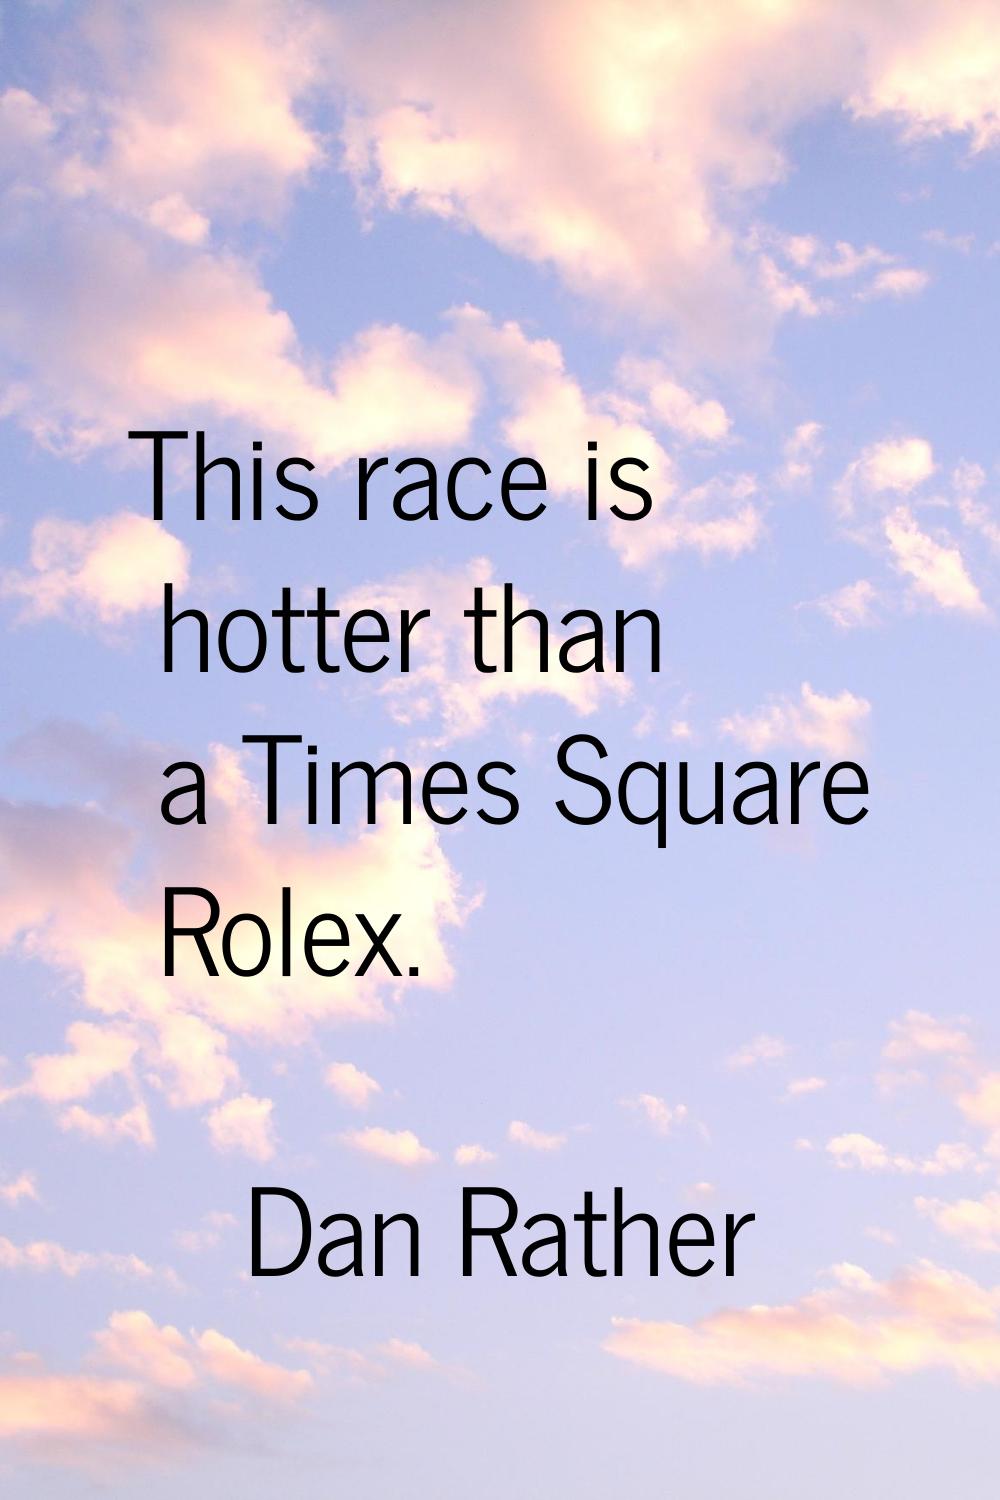 This race is hotter than a Times Square Rolex.